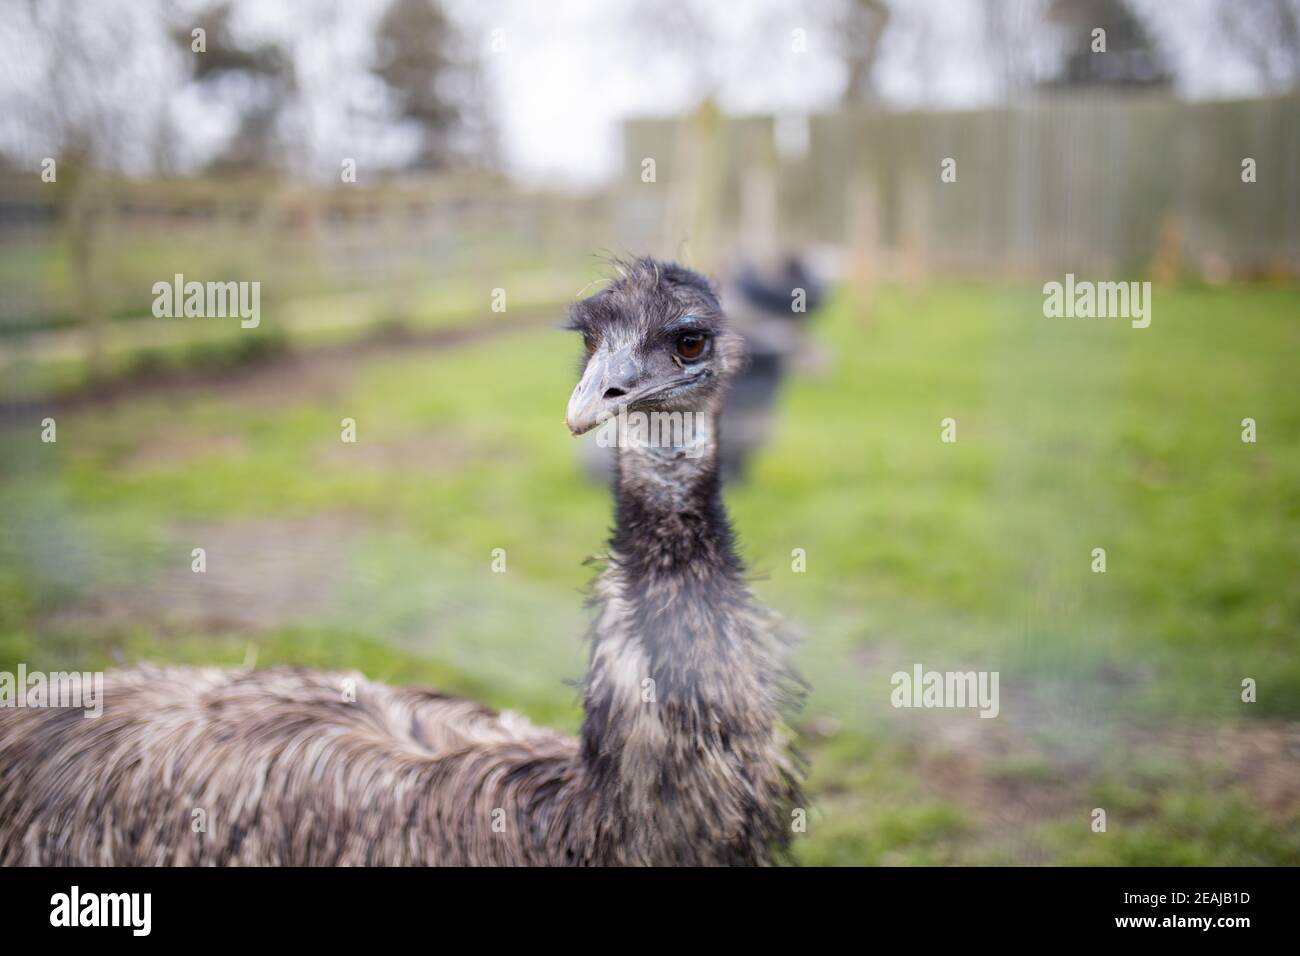 Up close view of an Emu behind a wire fence at a farmyard Stock Photo